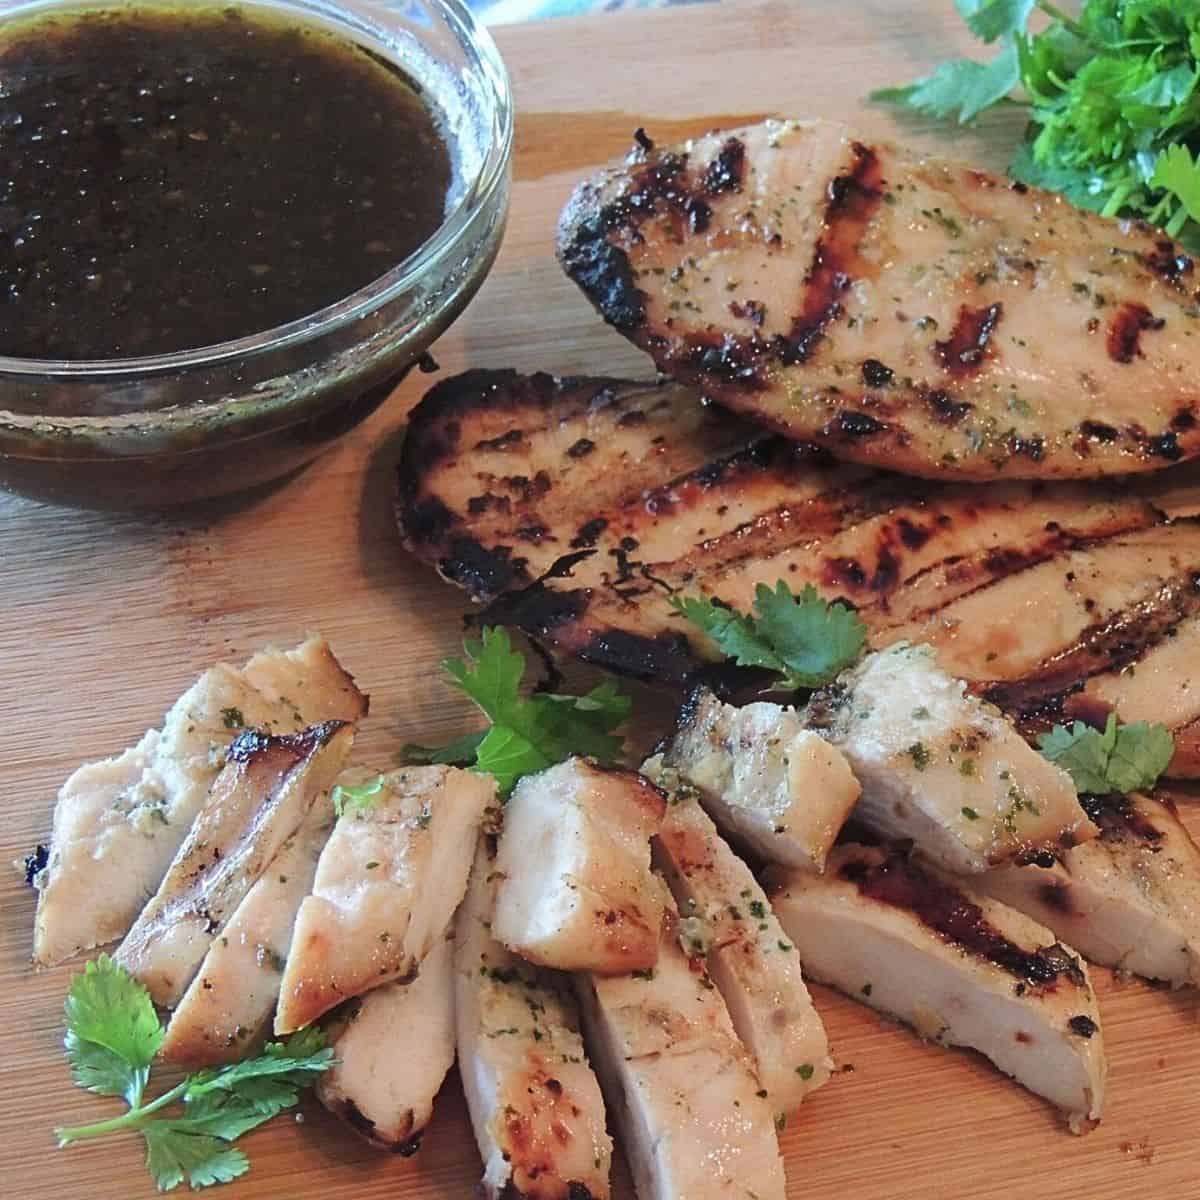 sliced grilled and whole chicken breast on cutting board.